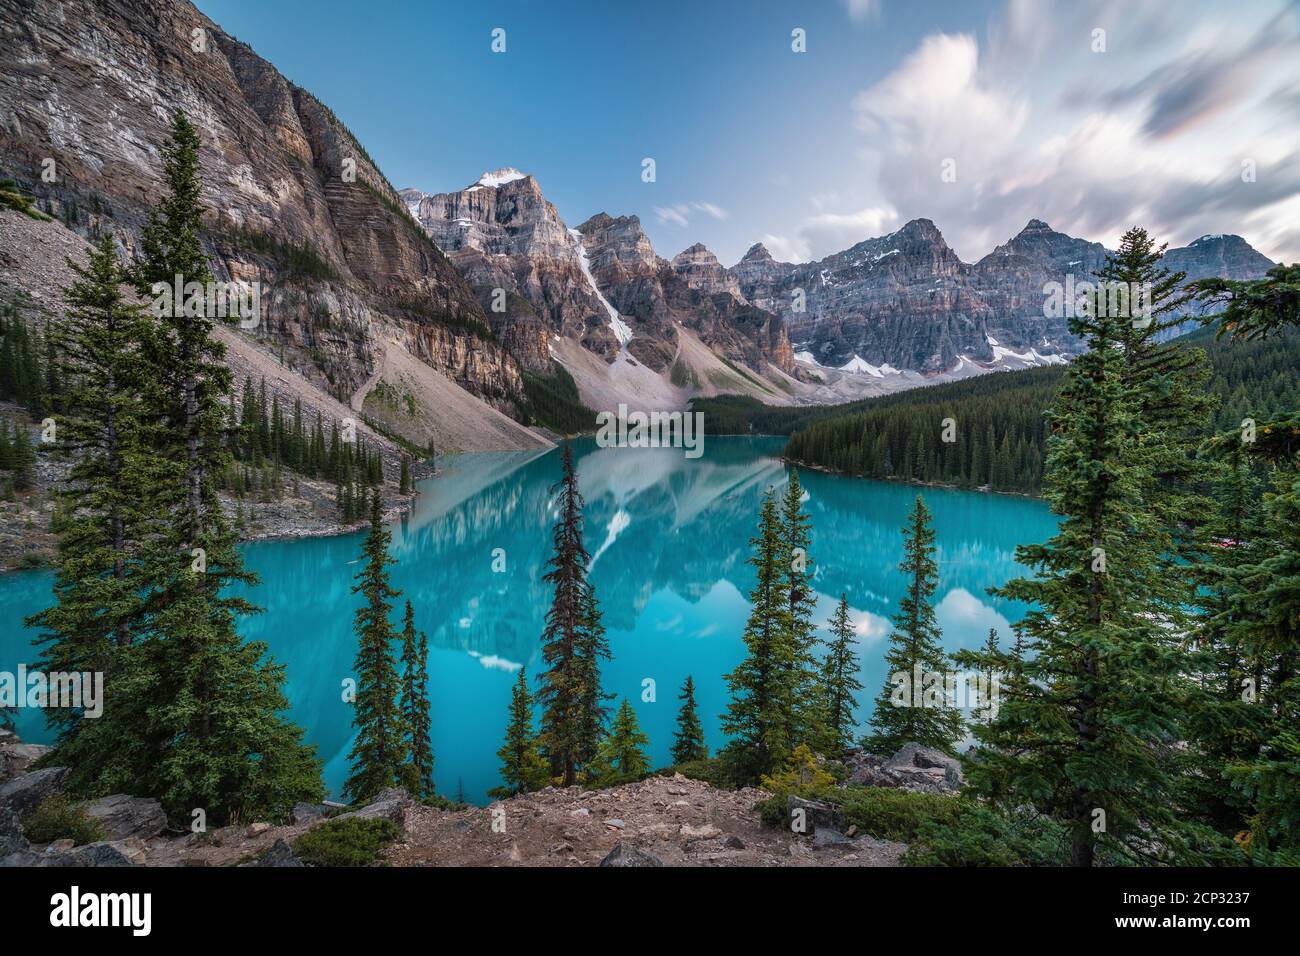 Moraine Lake and Valley of the Ten Peaks at dusk in Banff National Park, Alberta, Canada. Stock Photo